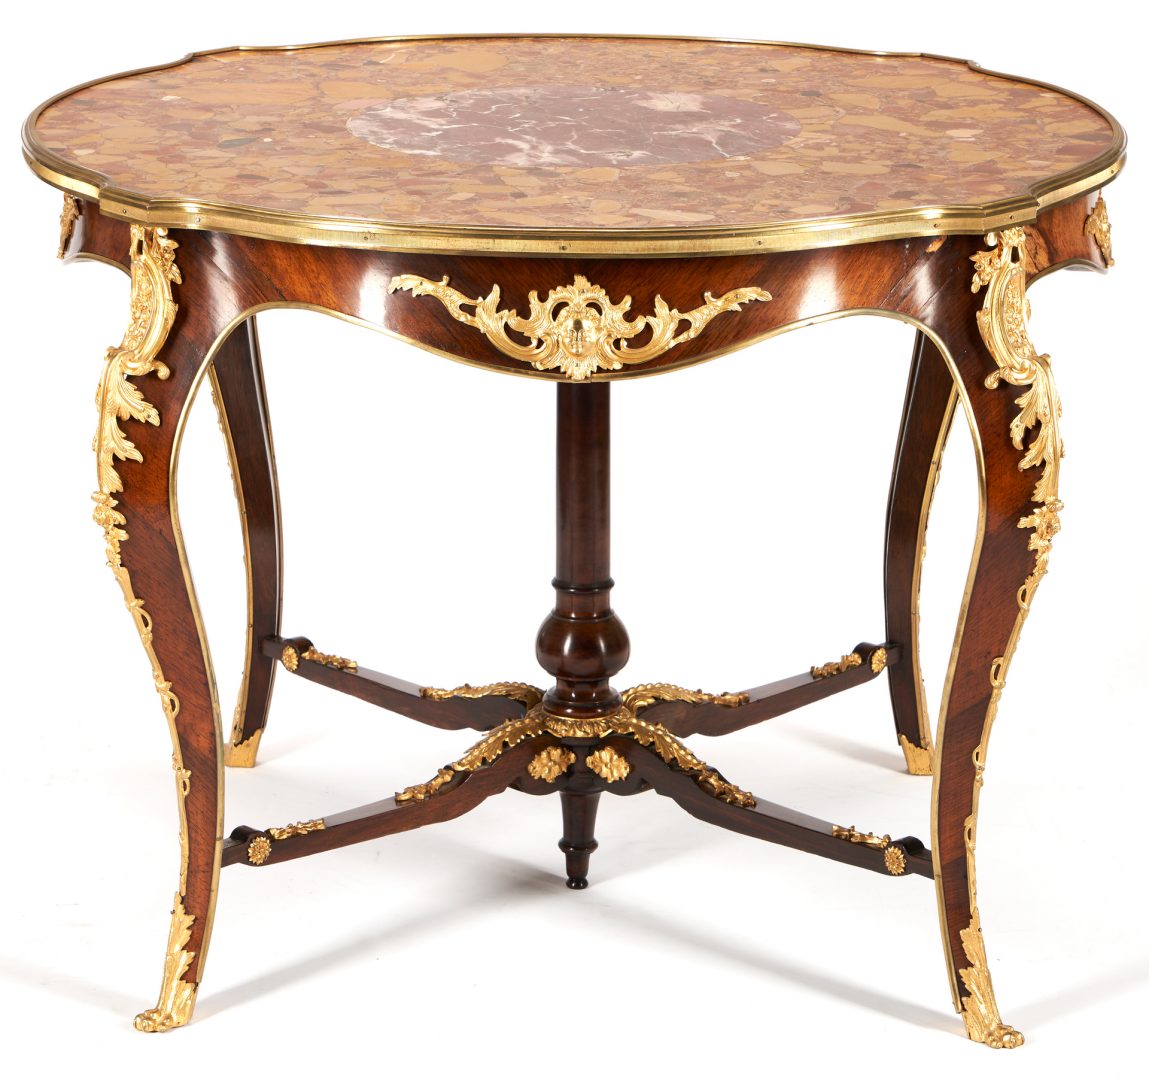 Lot 168: Louis XV Ormolu Mounted Center Table with Variegated Marble Top